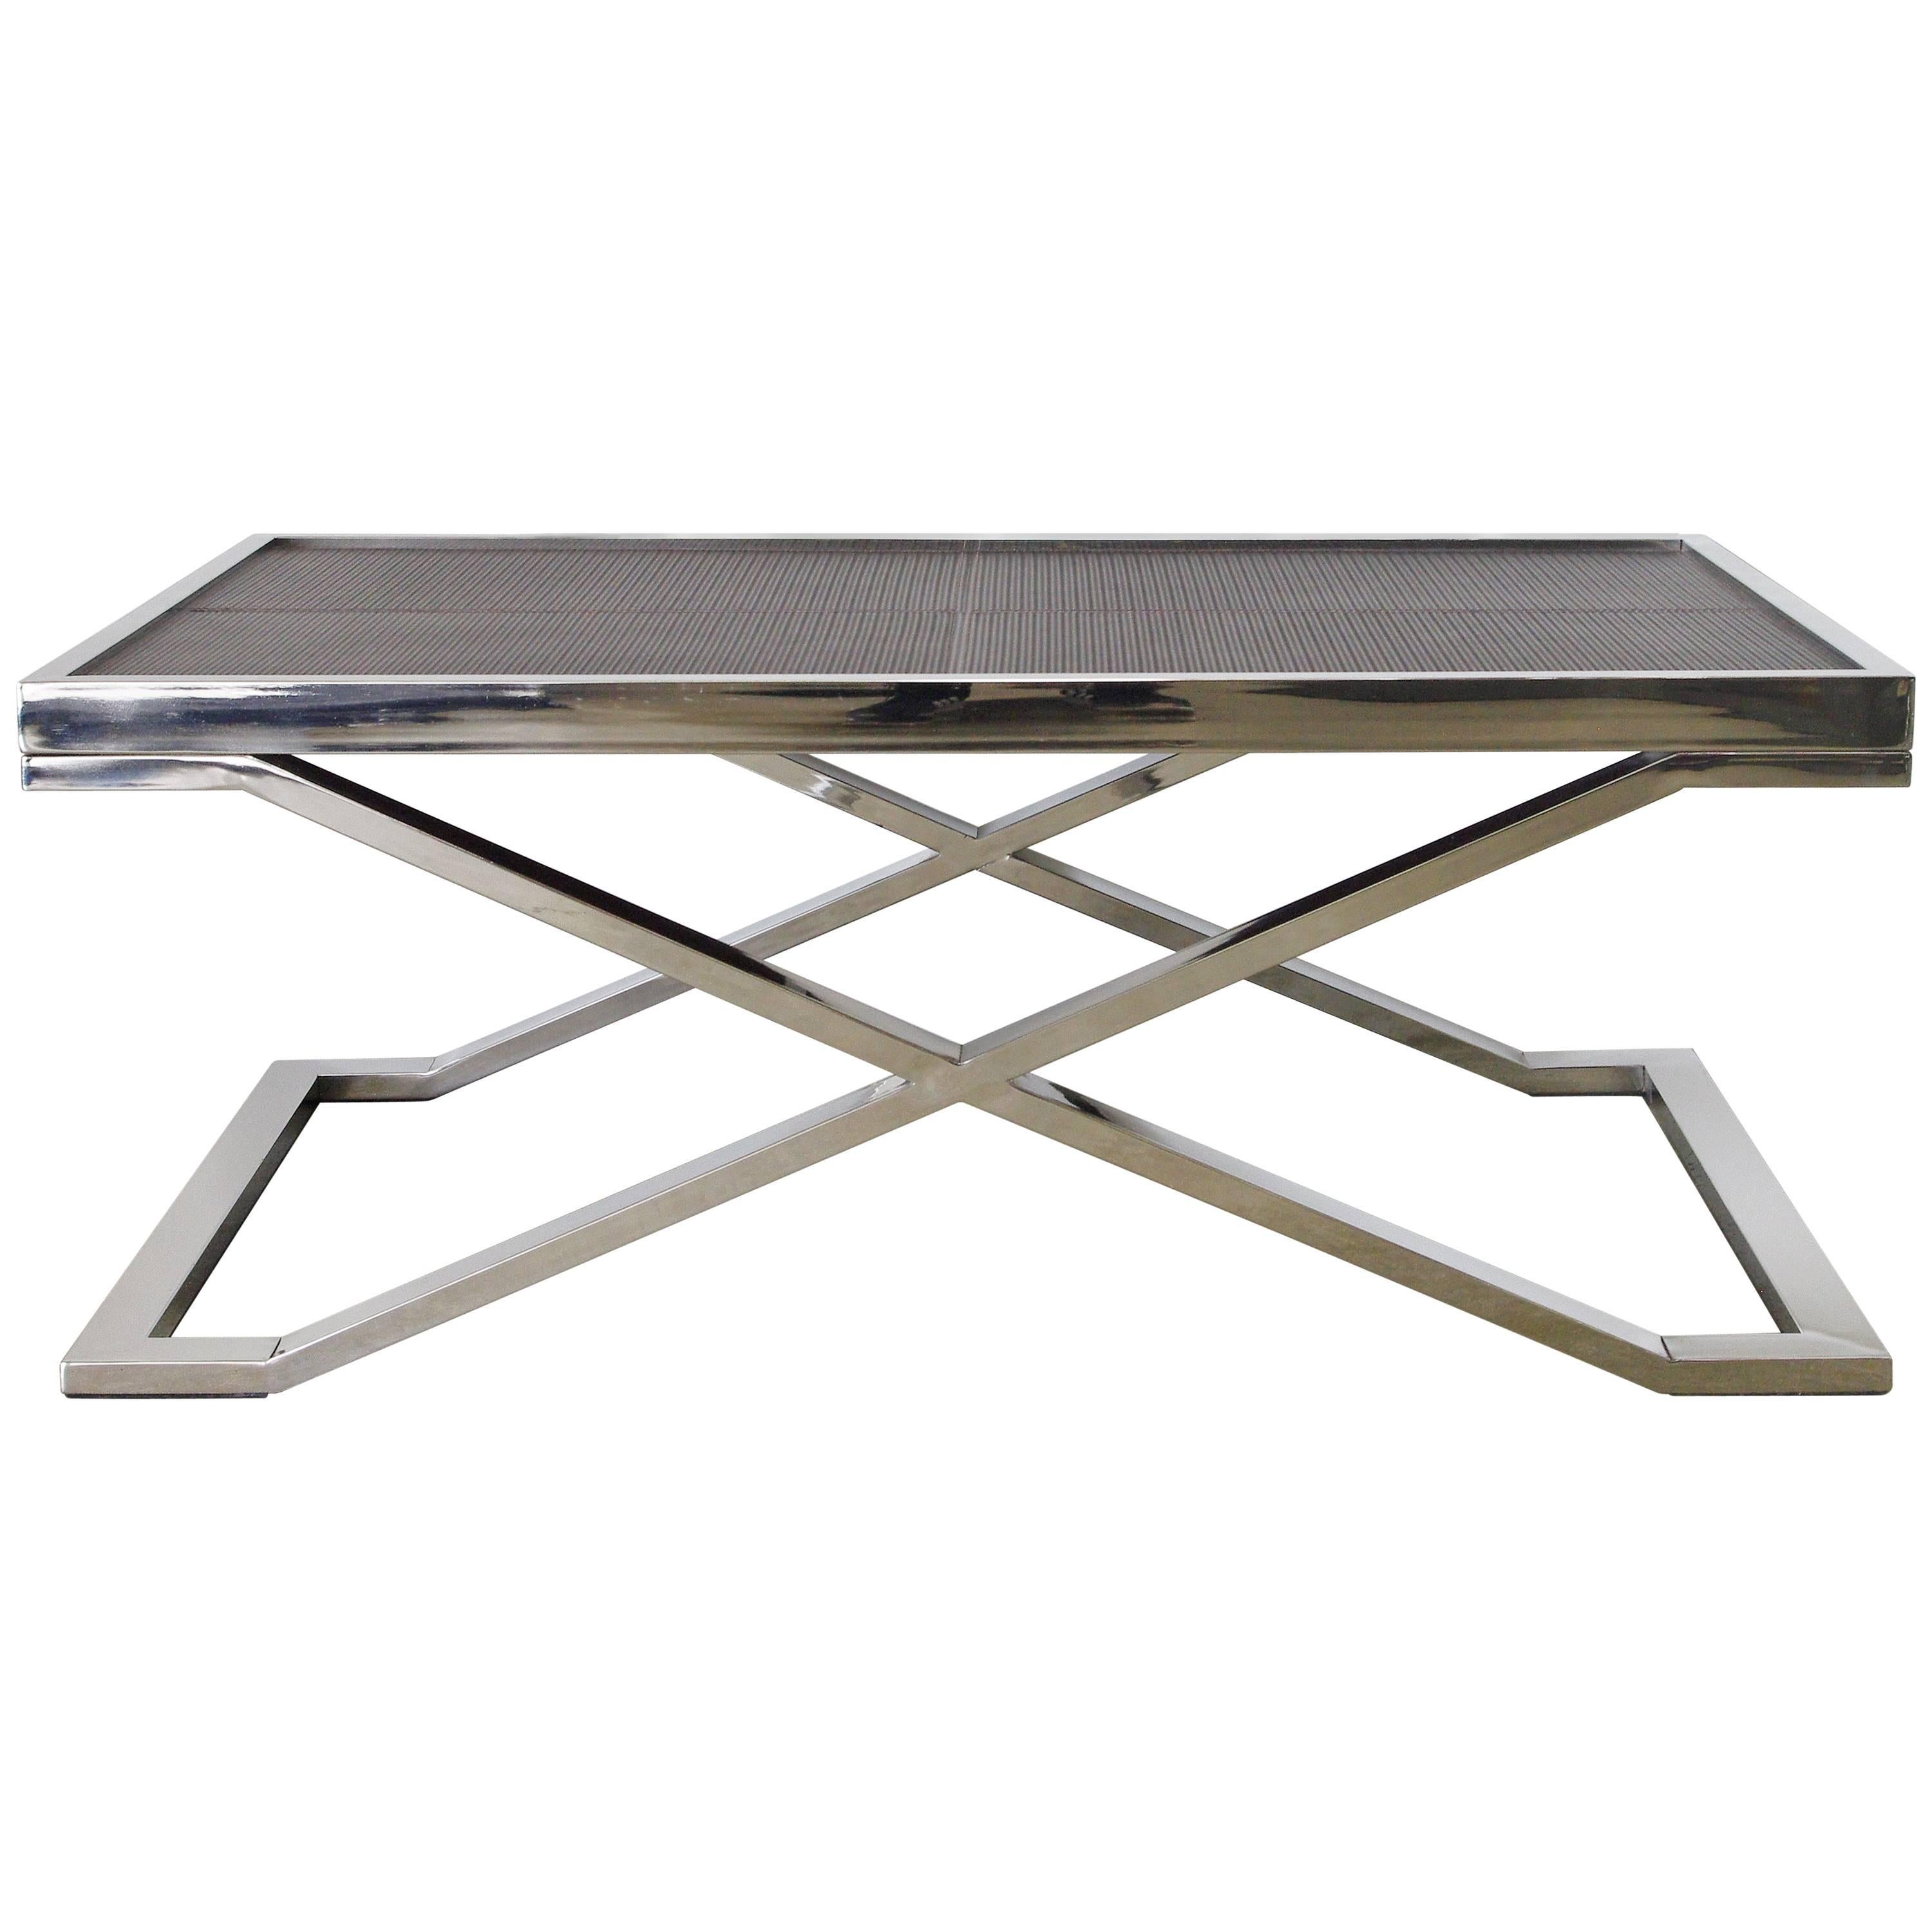 Leather and Stainless Steel Coffee Table by Fabio Ltd FINAL CLEARANCE SALE